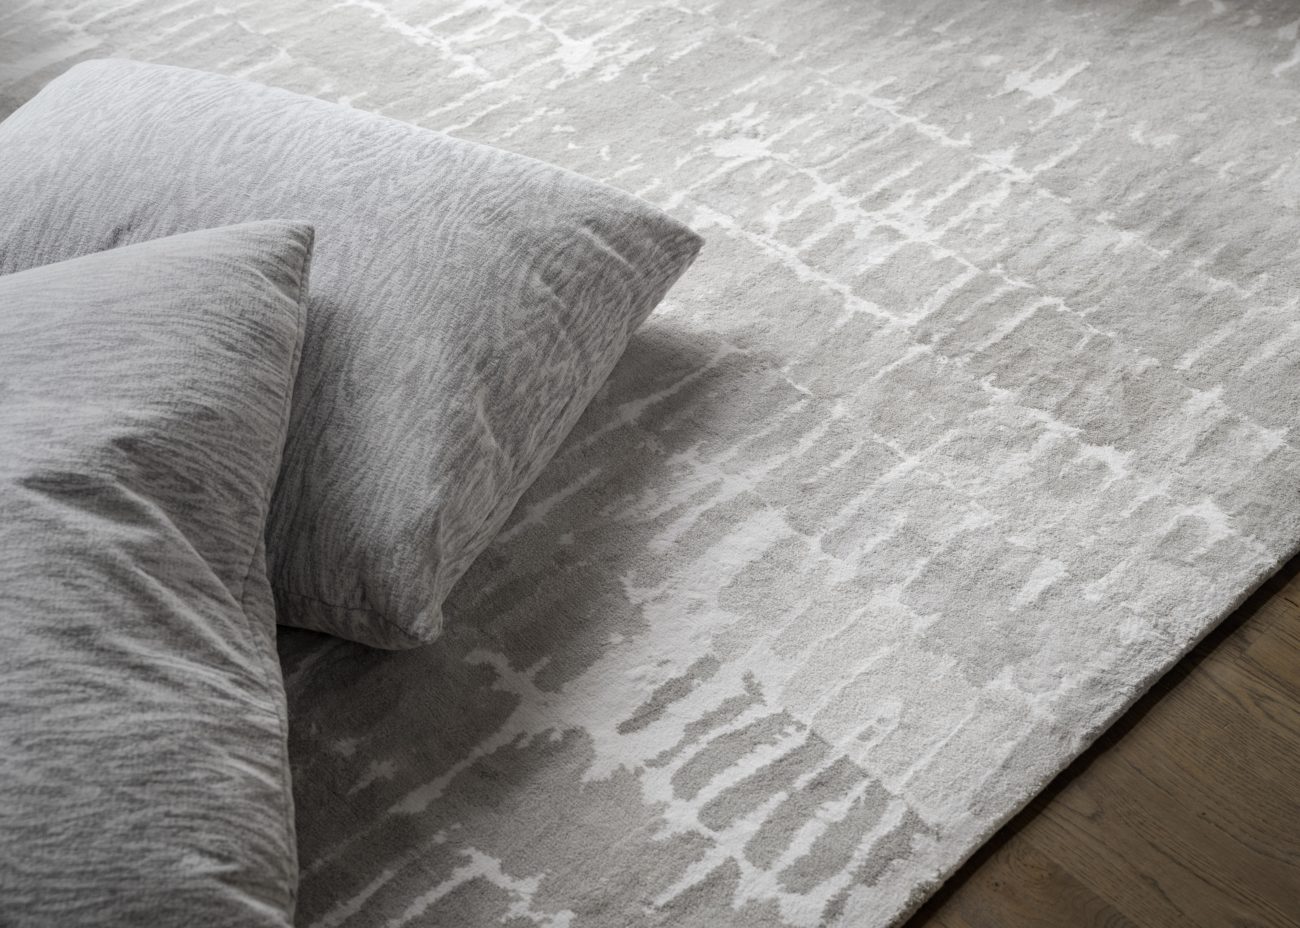 Knotty Fabric on Pillows with Brushwork Rug